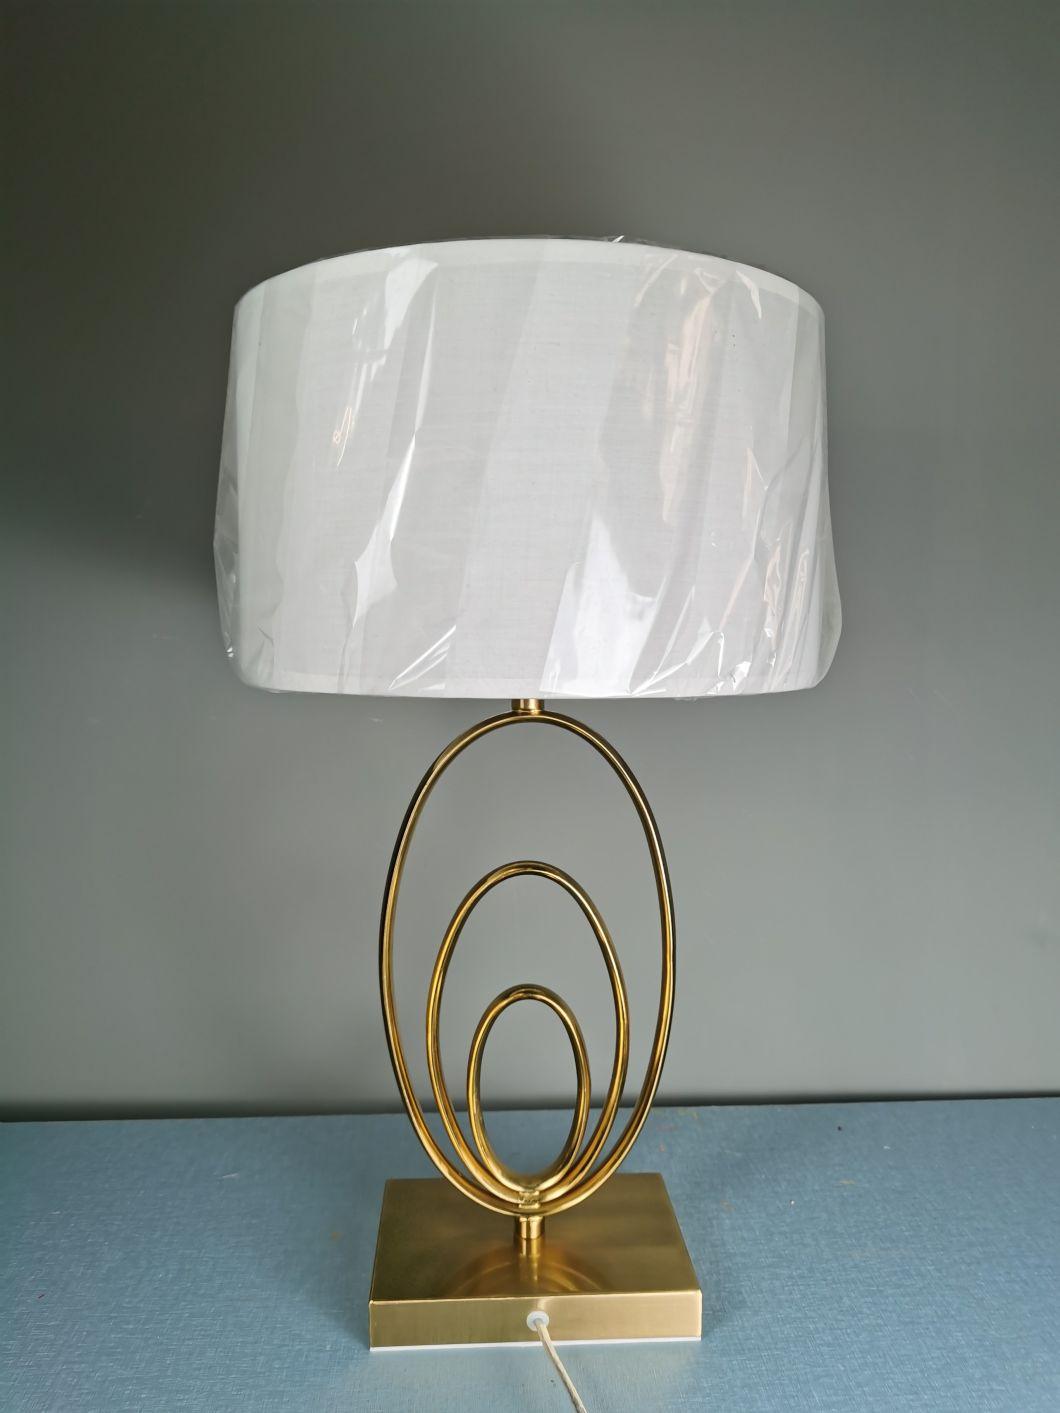 Metal Table Lamp From China Manufacturer